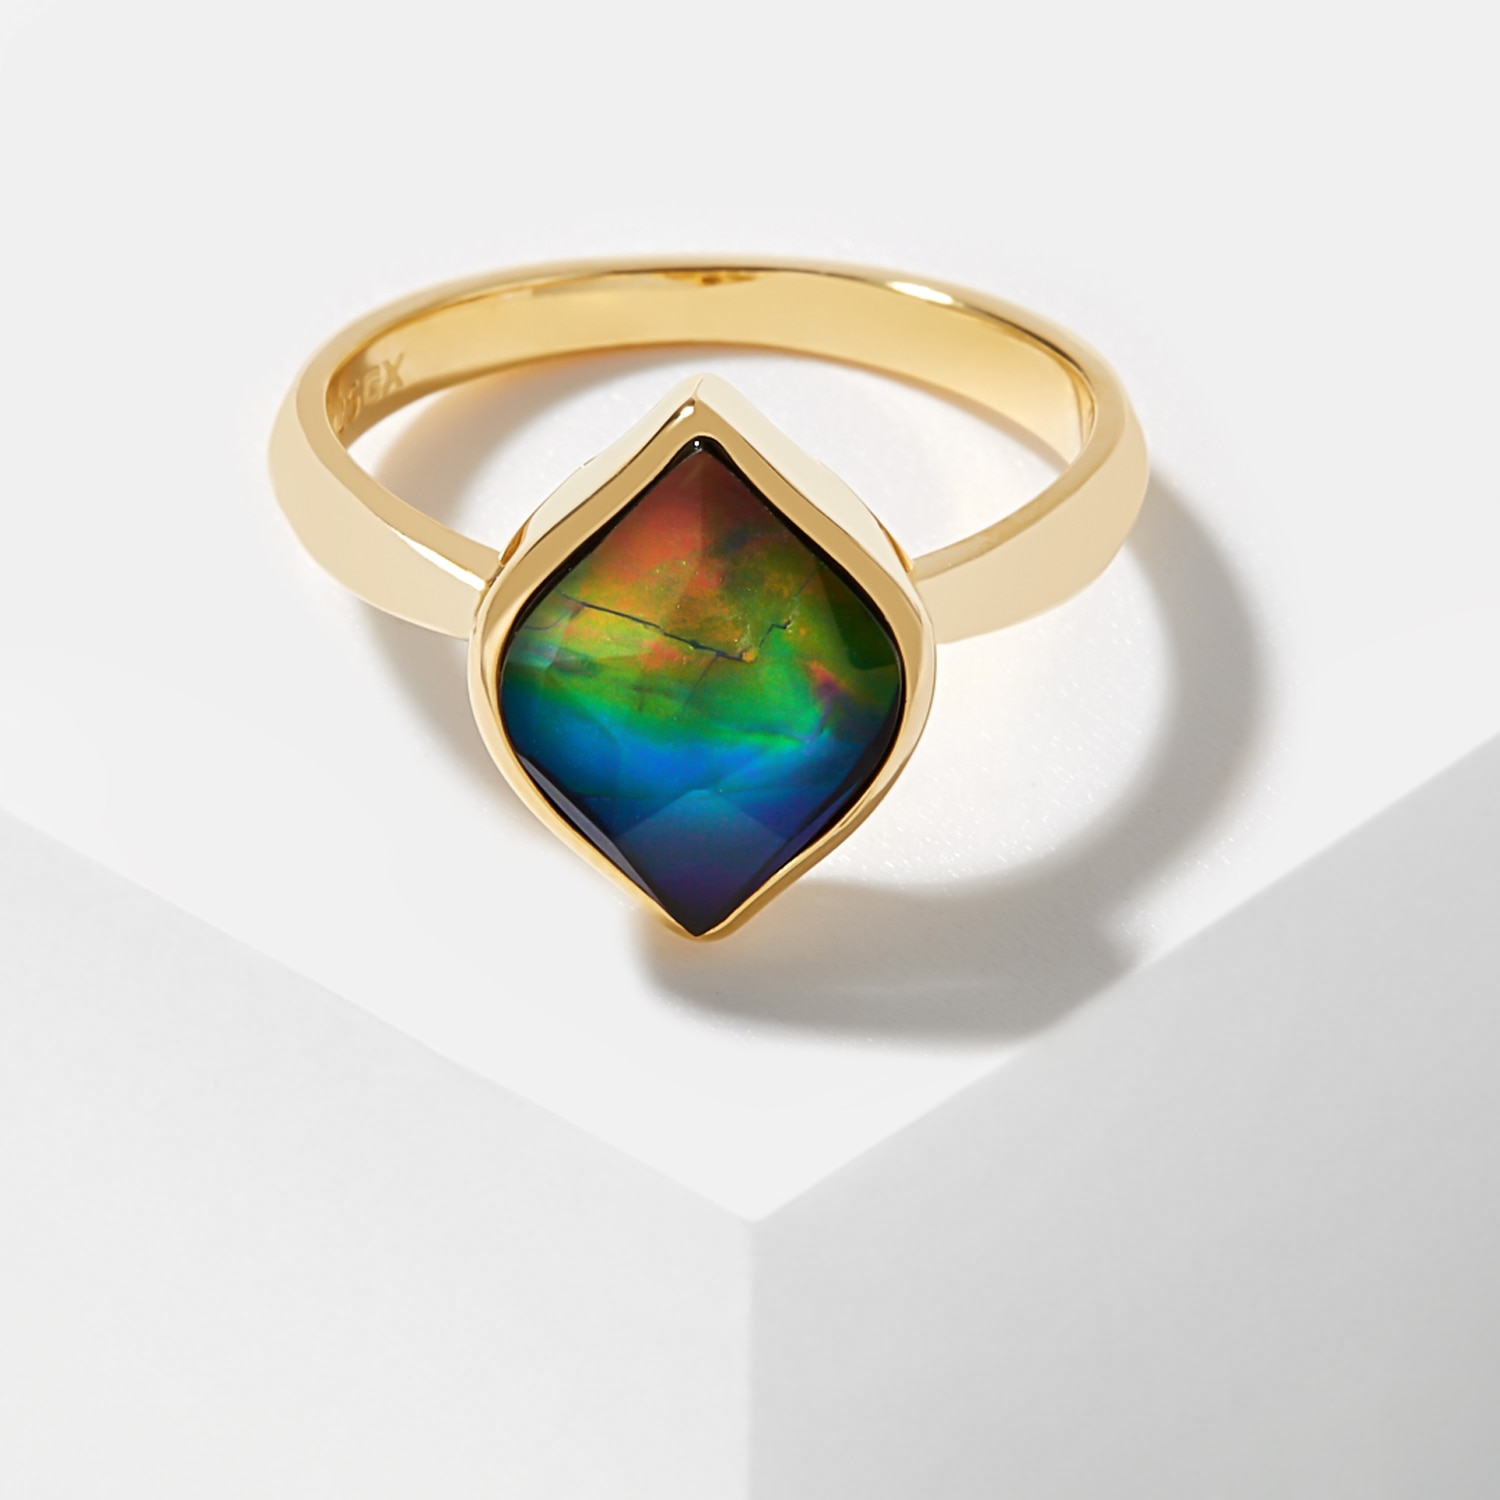 KORITE Ammolite - Good things, like our Gold Collection sale, never seem to  last. But our Ammolite Jewellery is crafted to last the ages. Each piece  comes with a Lifetime Warranty. Not